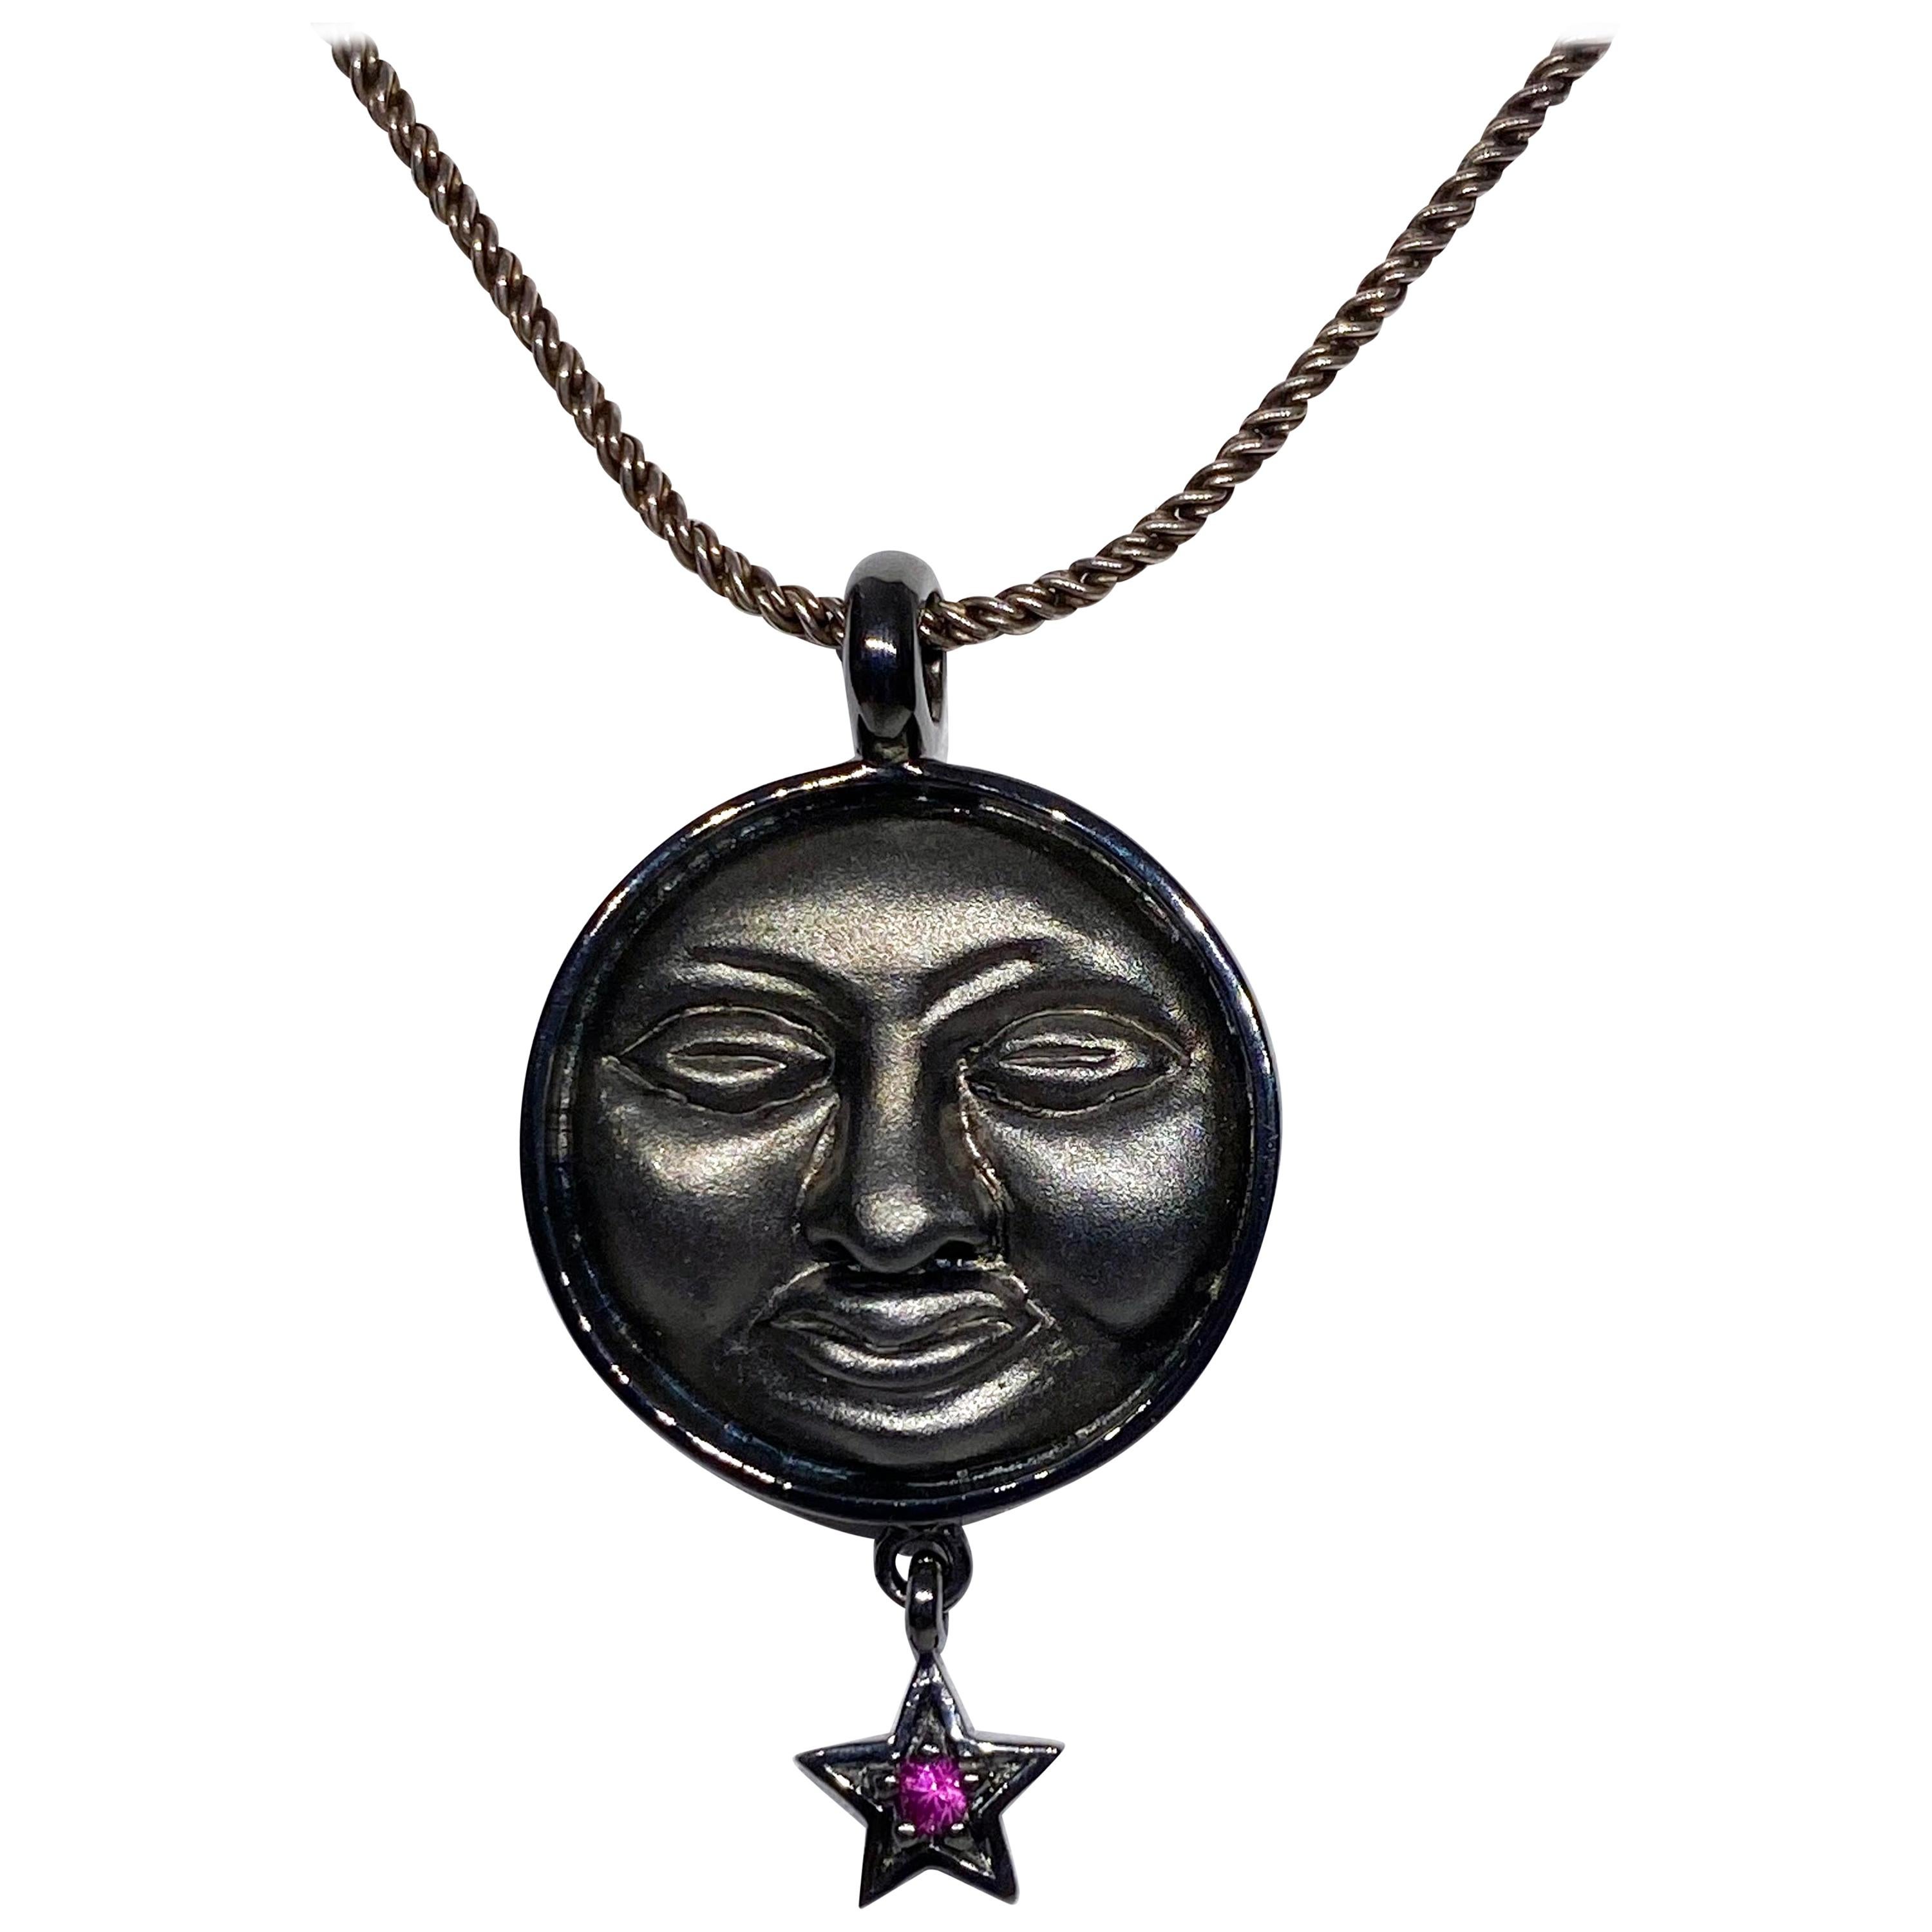 Blackened Silver Moon Face Pendant For Sale